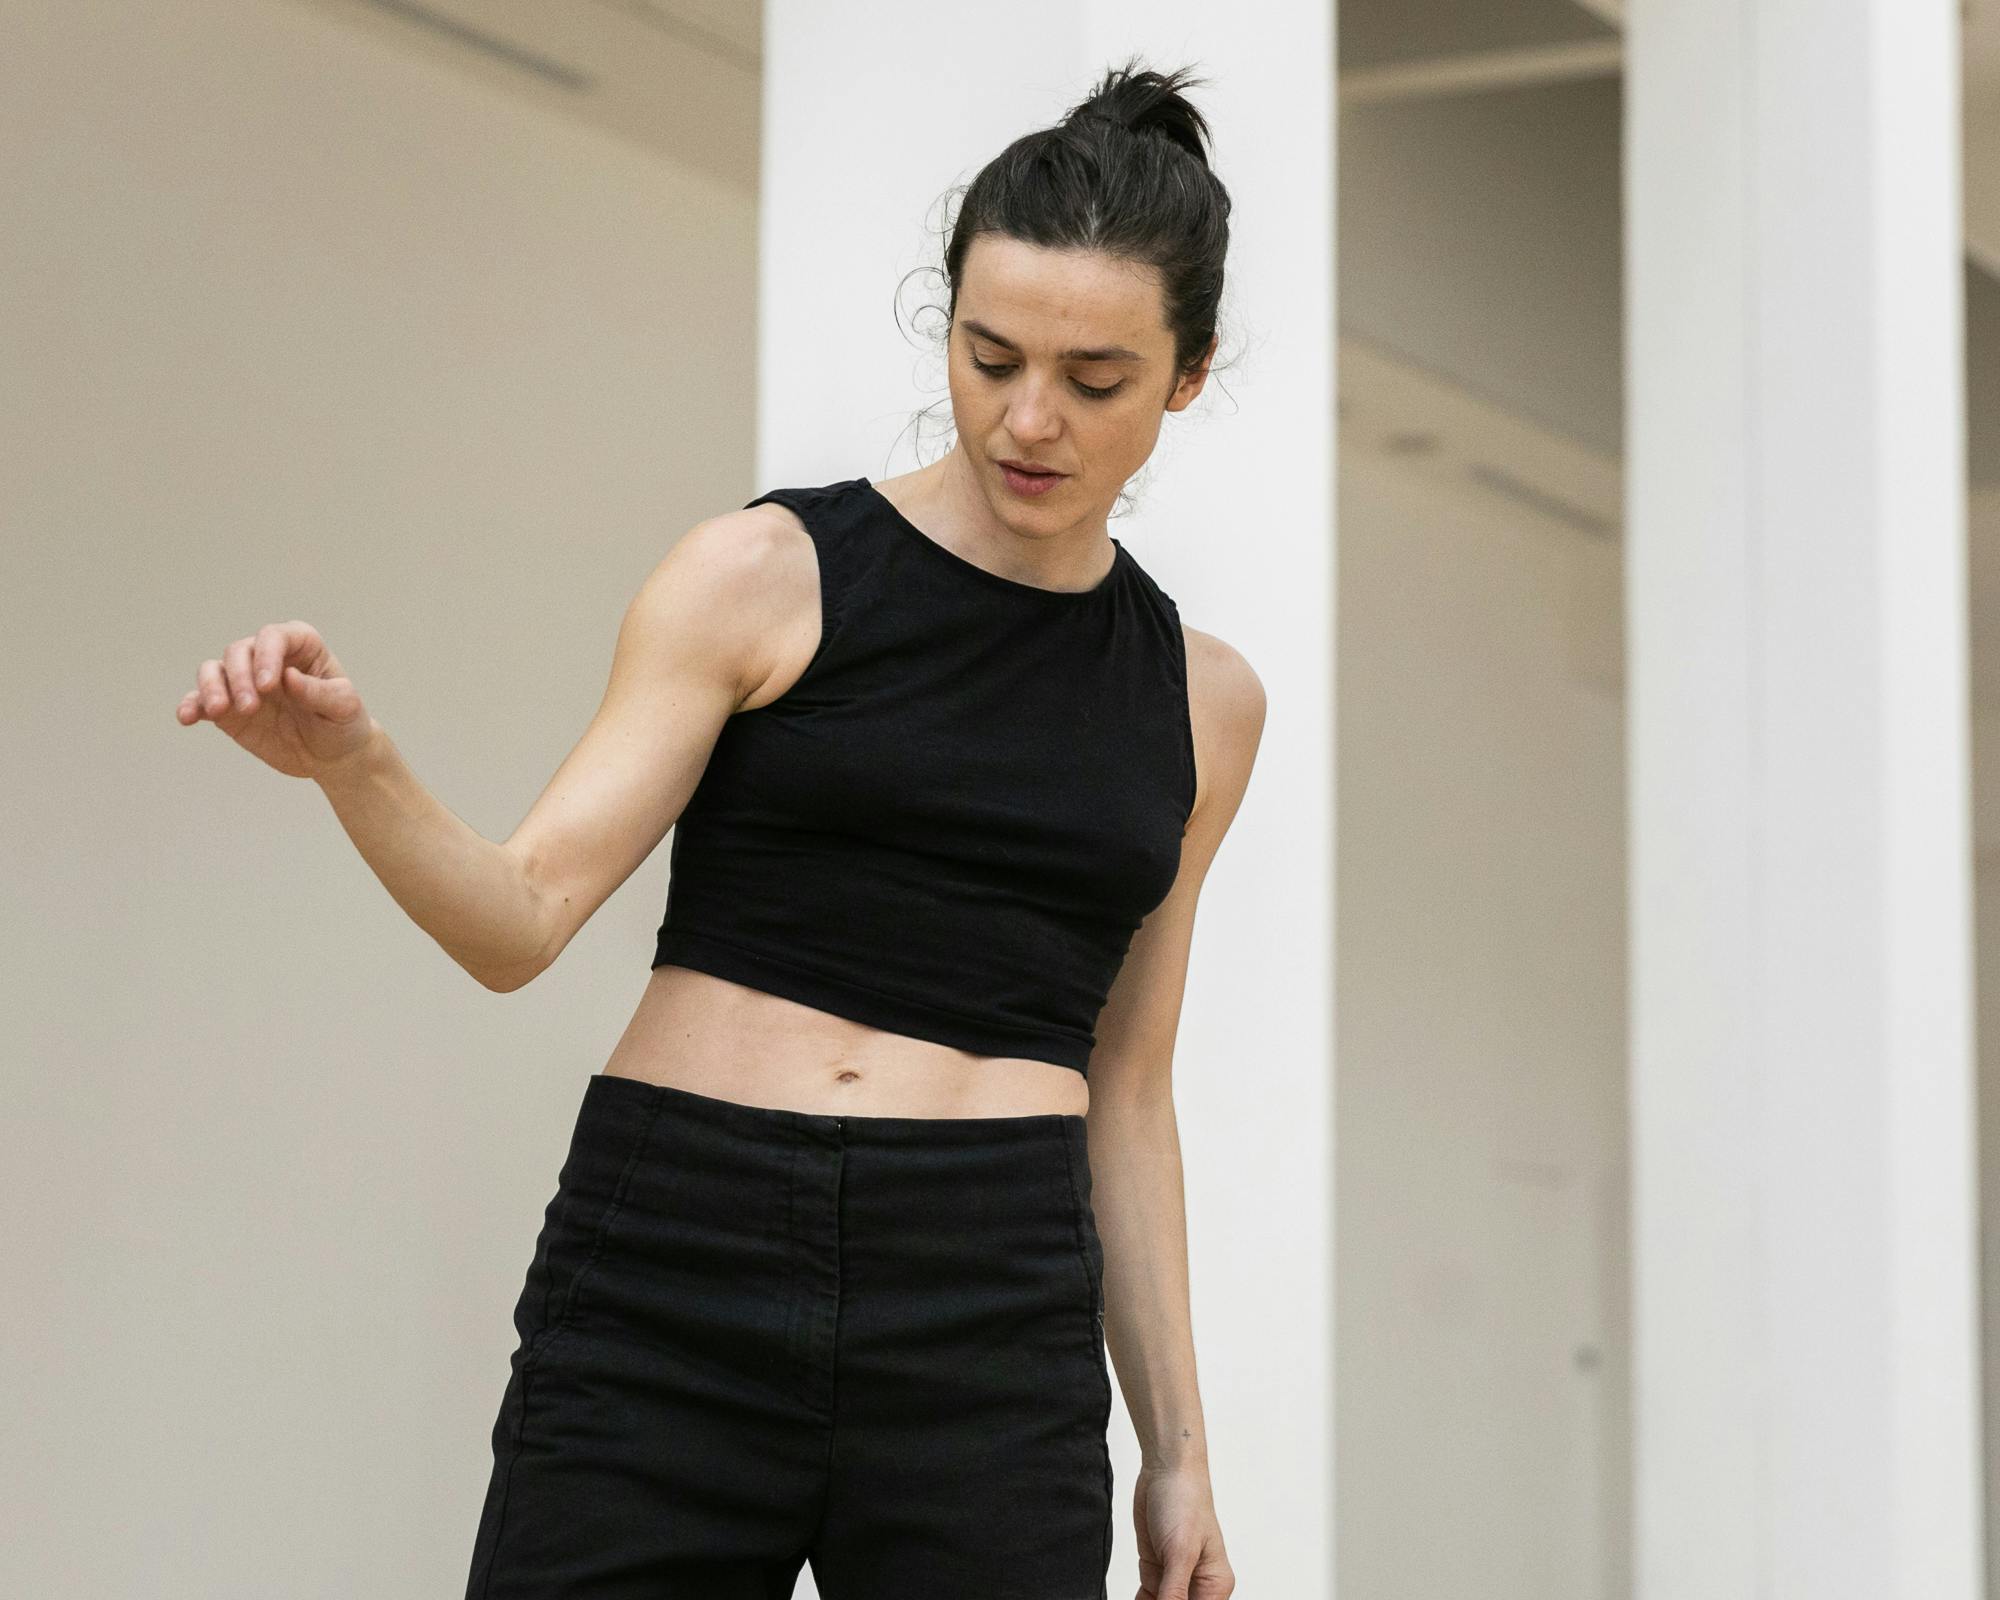 Annamaria Ajmone in rehearsal. She is wearing a black tank top and dark pants and is raising her right arm, bent, to shoulder height.